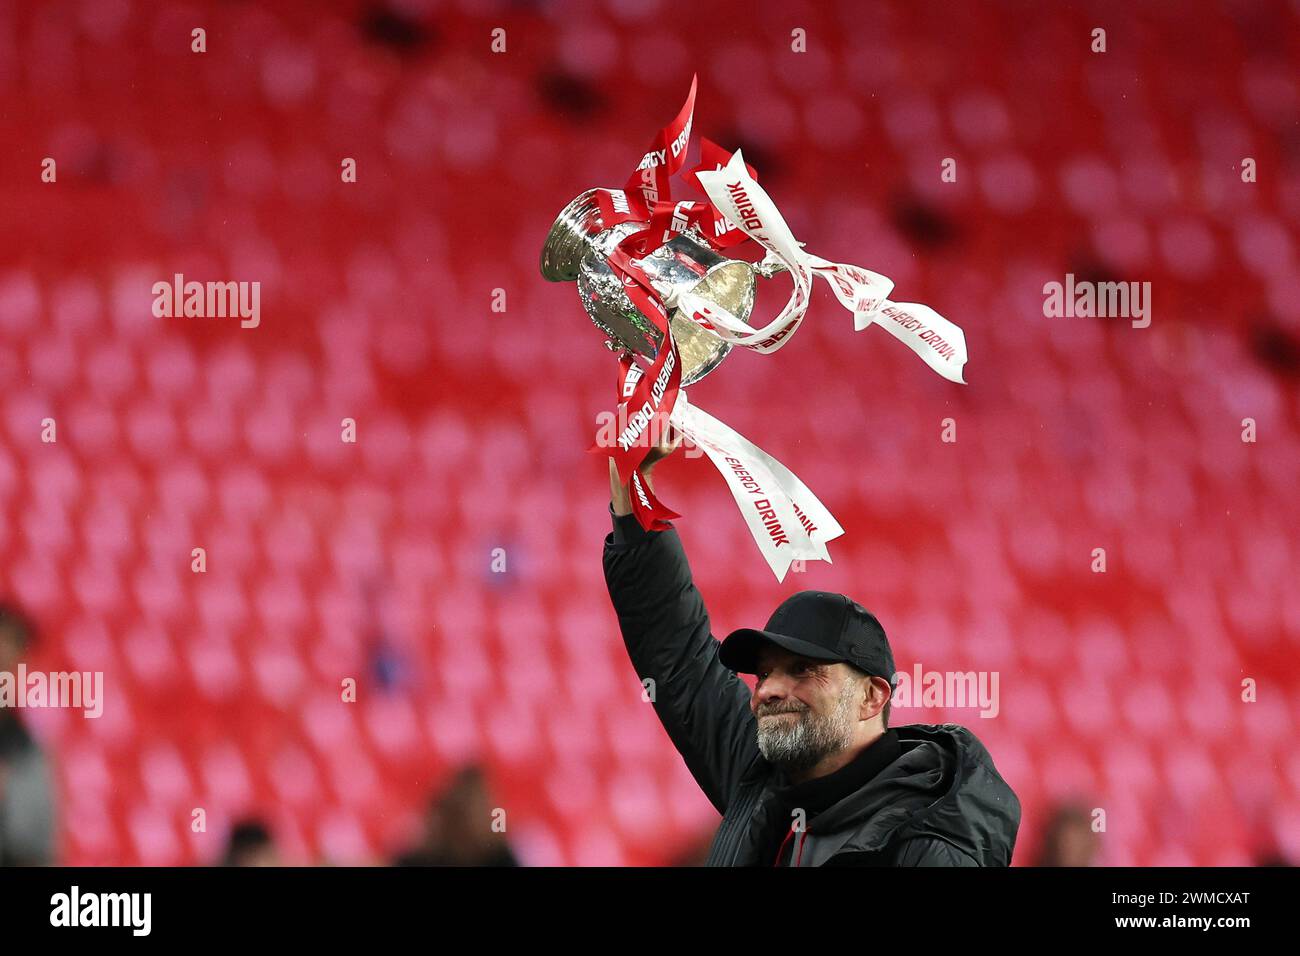 London, UK. 25th Feb, 2024. Jurgen Klopp, the manager of Liverpool FC lifts the Carabao EFL Cup trophy as he celebrates after his teams win. Carabao Cup final 2024, Chelsea v Liverpool at Wembley Stadium in London on Sunday 25th February 2024. Editorial use only. pic by Andrew Orchard/Andrew Orchard sports photography/Alamy Live News Credit: Andrew Orchard sports photography/Alamy Live News Stock Photo